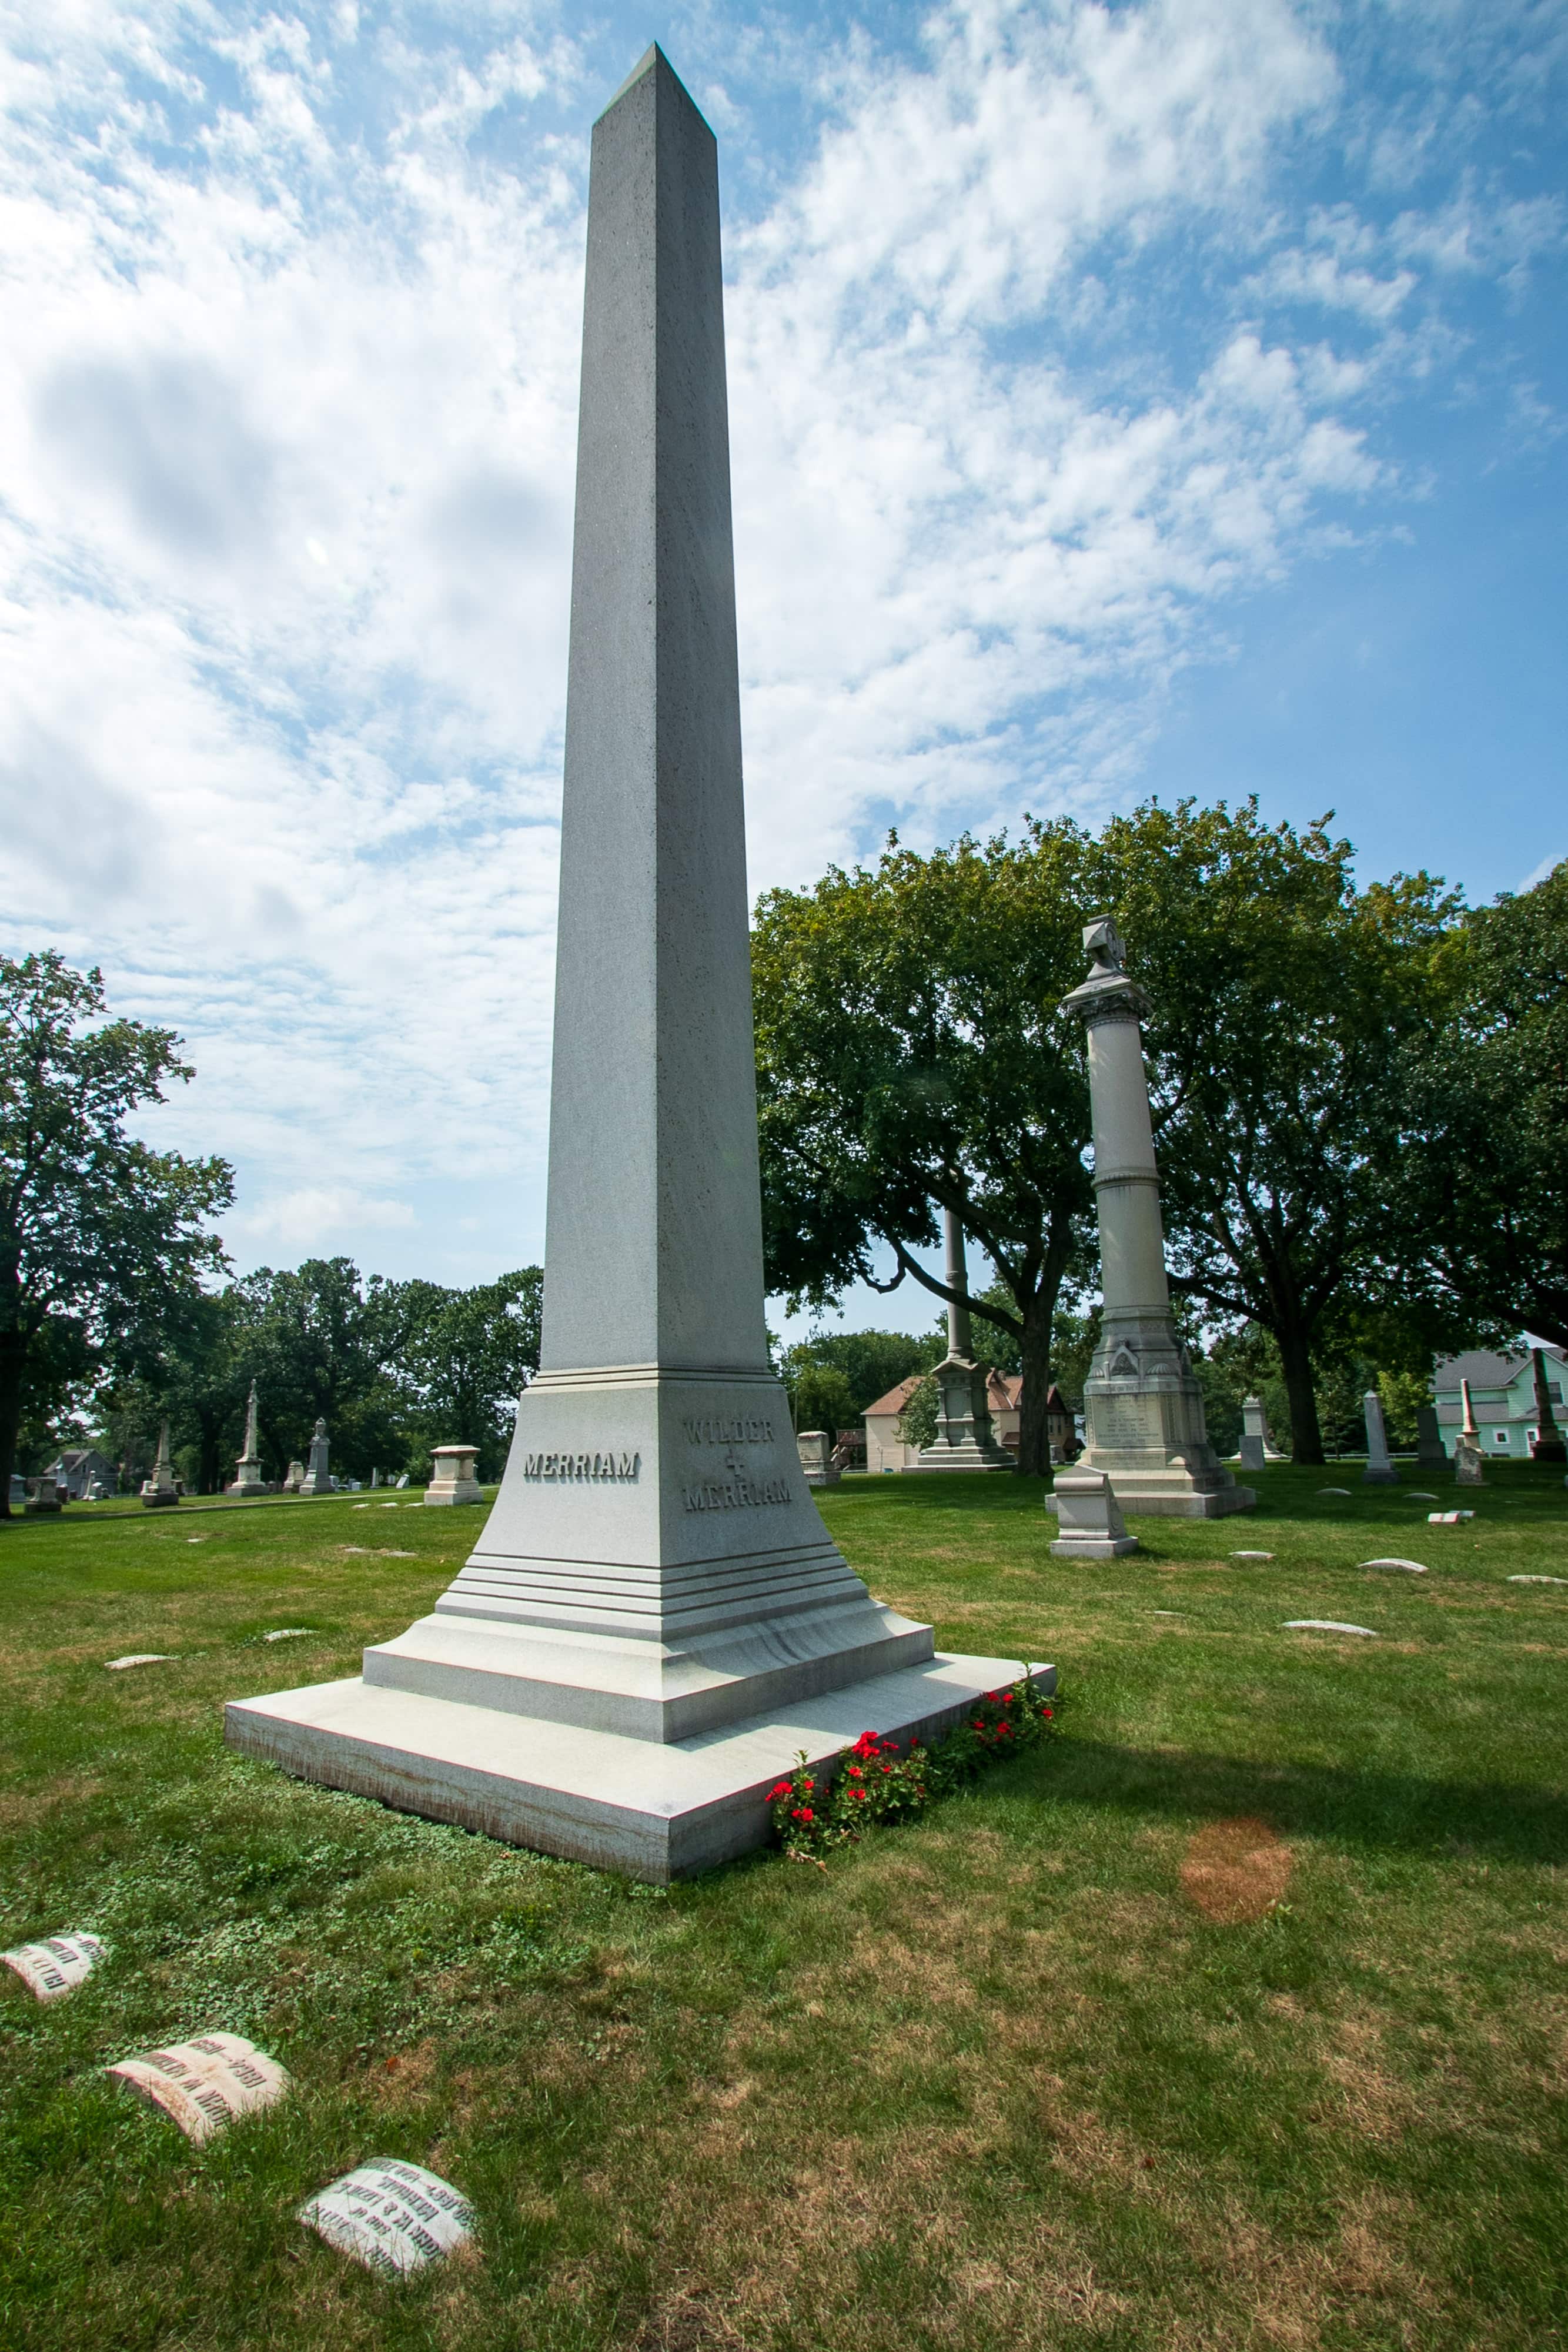 The Amherst Wilder family monument, an obelisk that rises above most other markers.